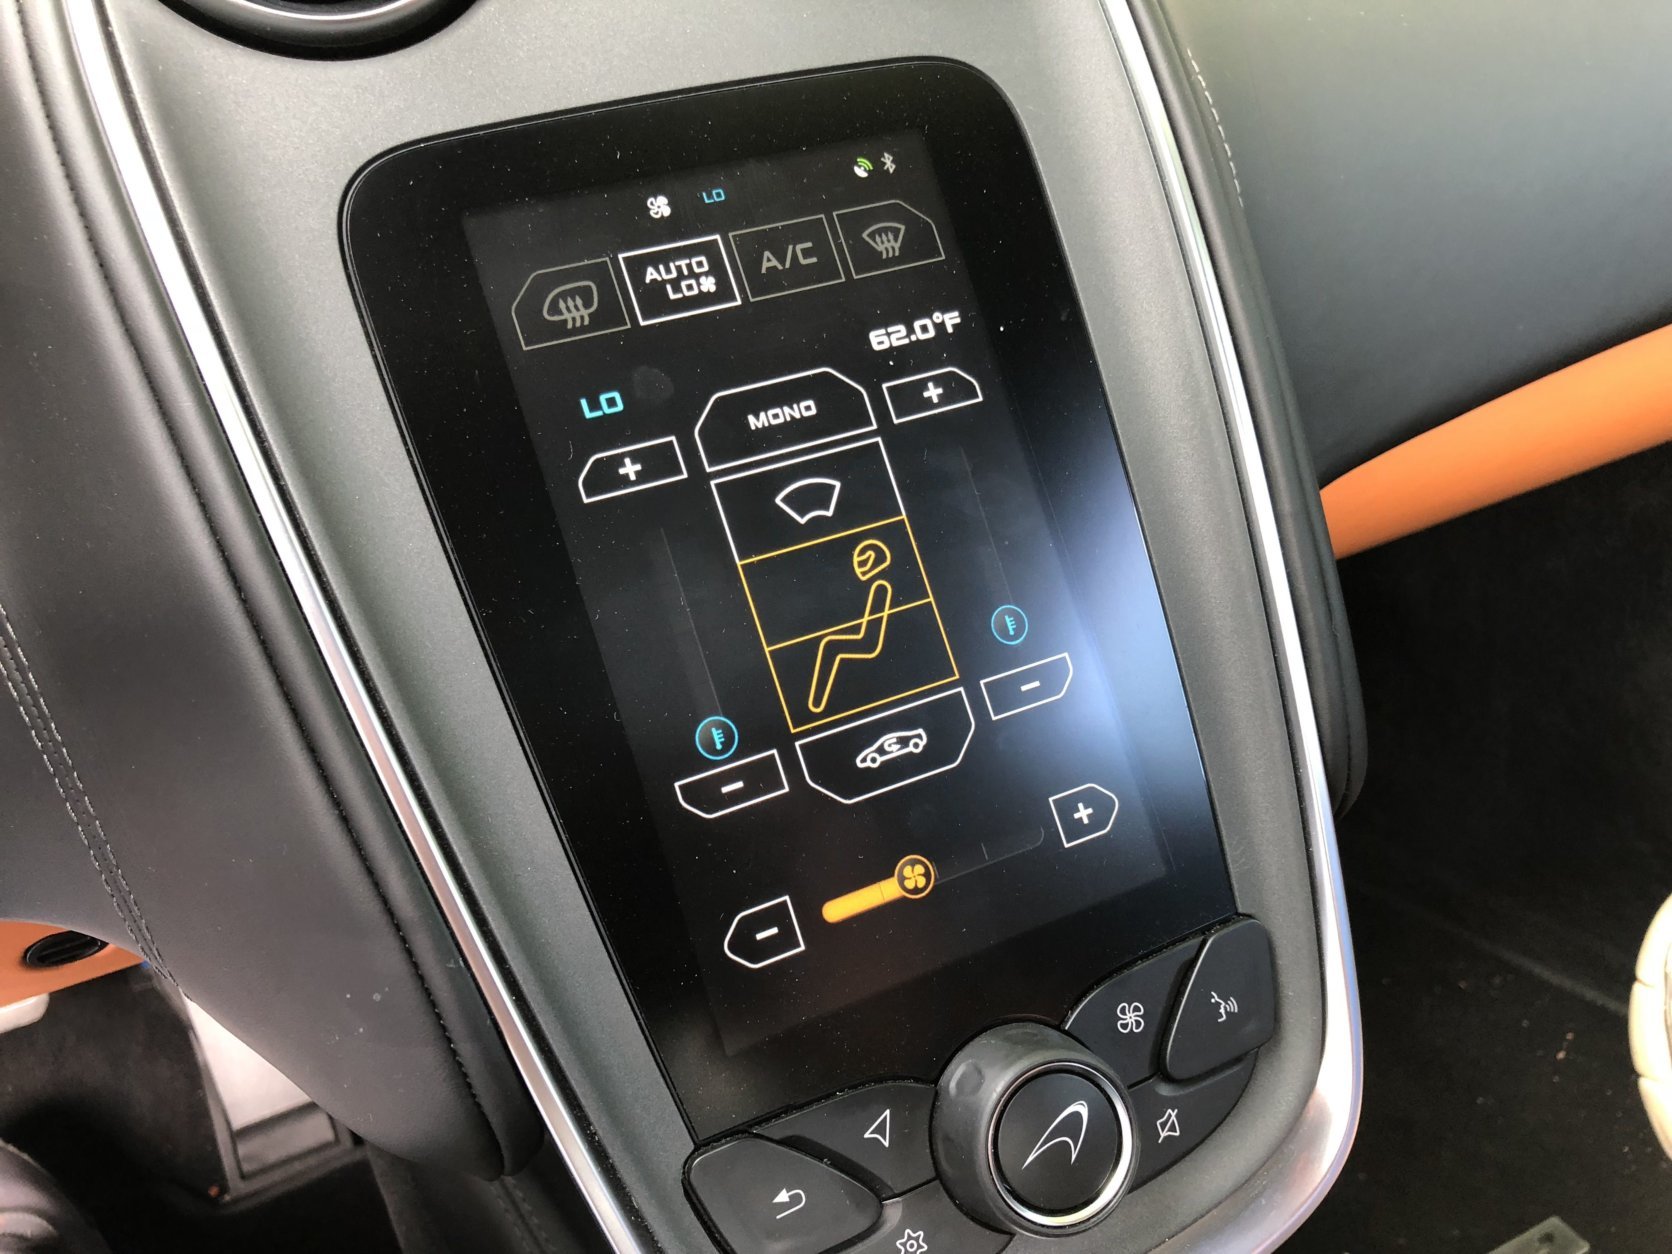 The Portrait screen works well for navigation. However, the radio’s interface screen sometimes takes a second to react. (WTOP/Mike Parris)